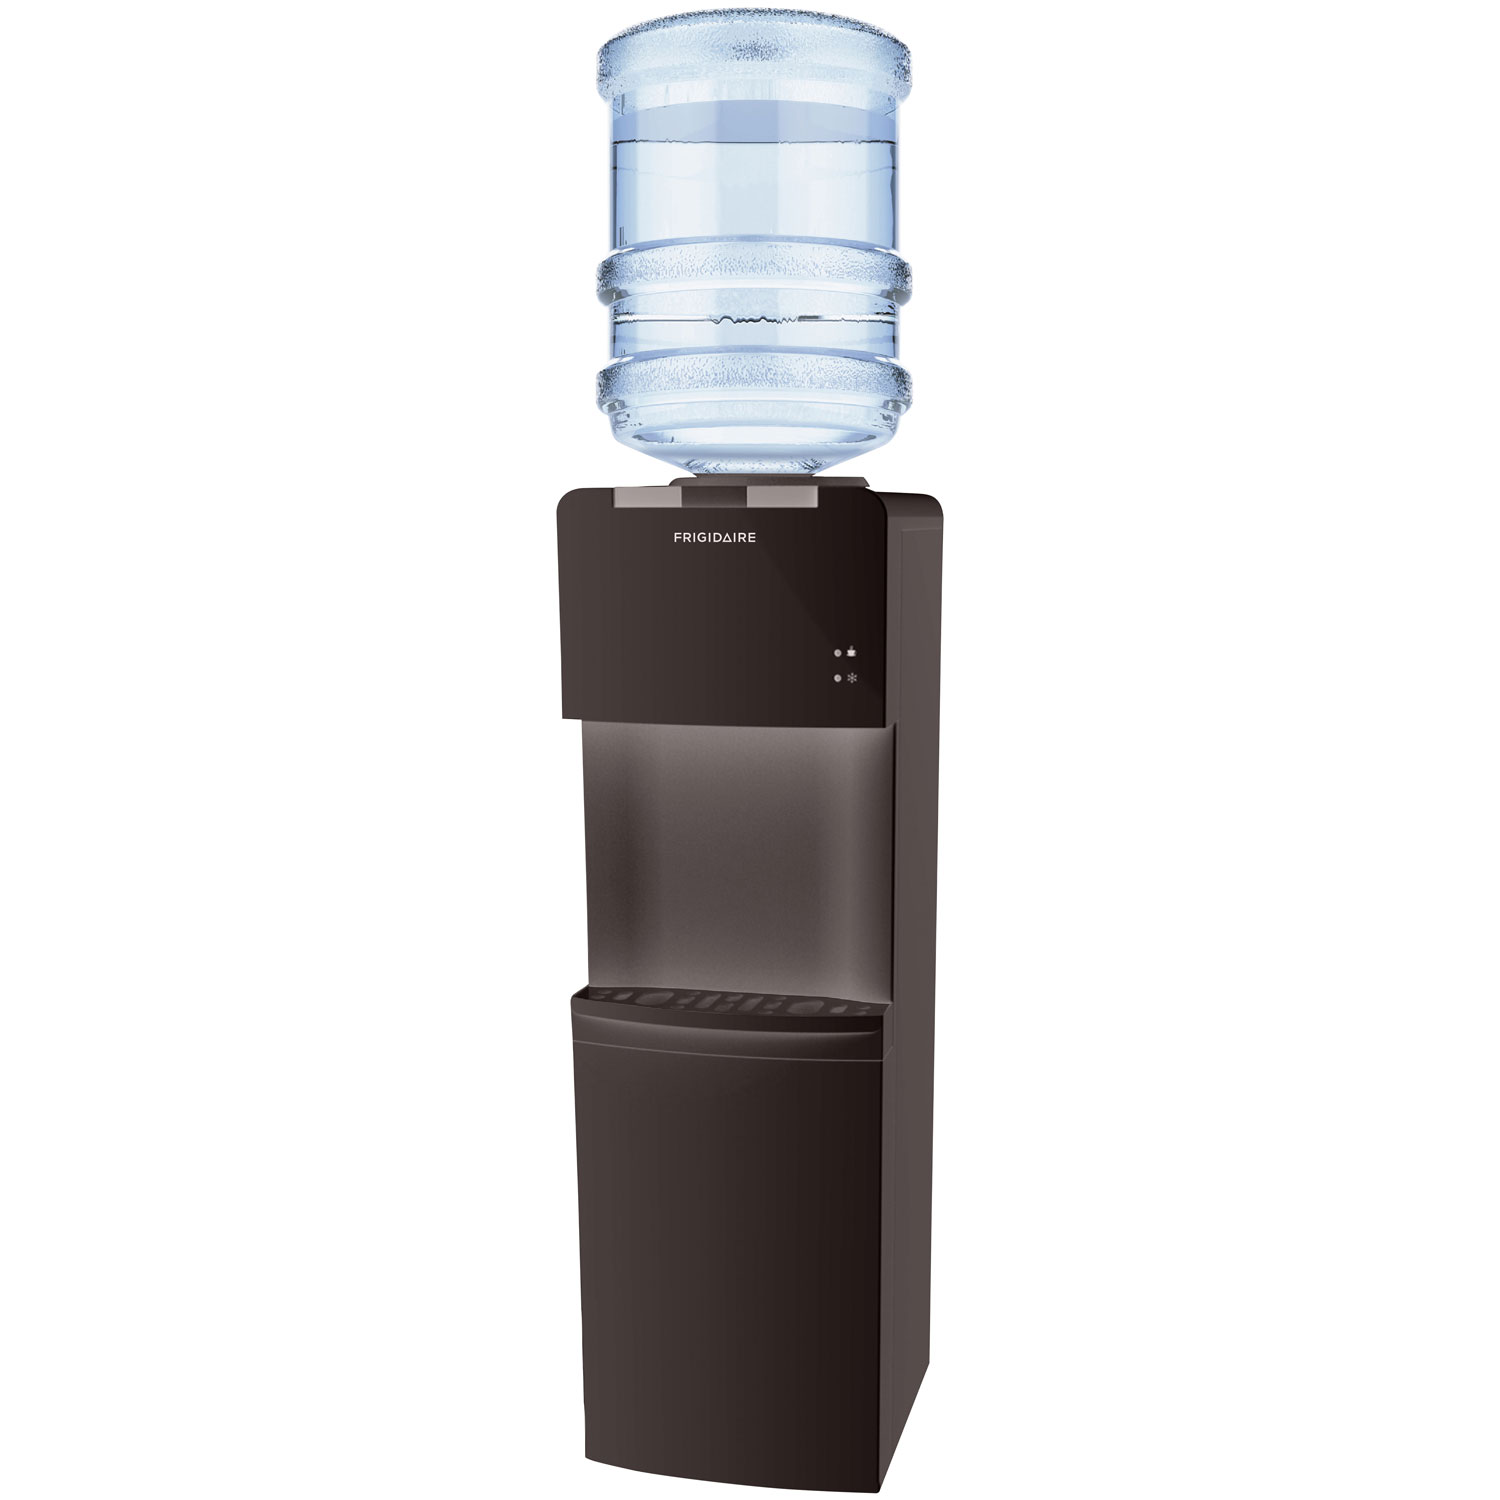 Frigidaire Warm/Cold Water Cooler (EFWC498) - Black